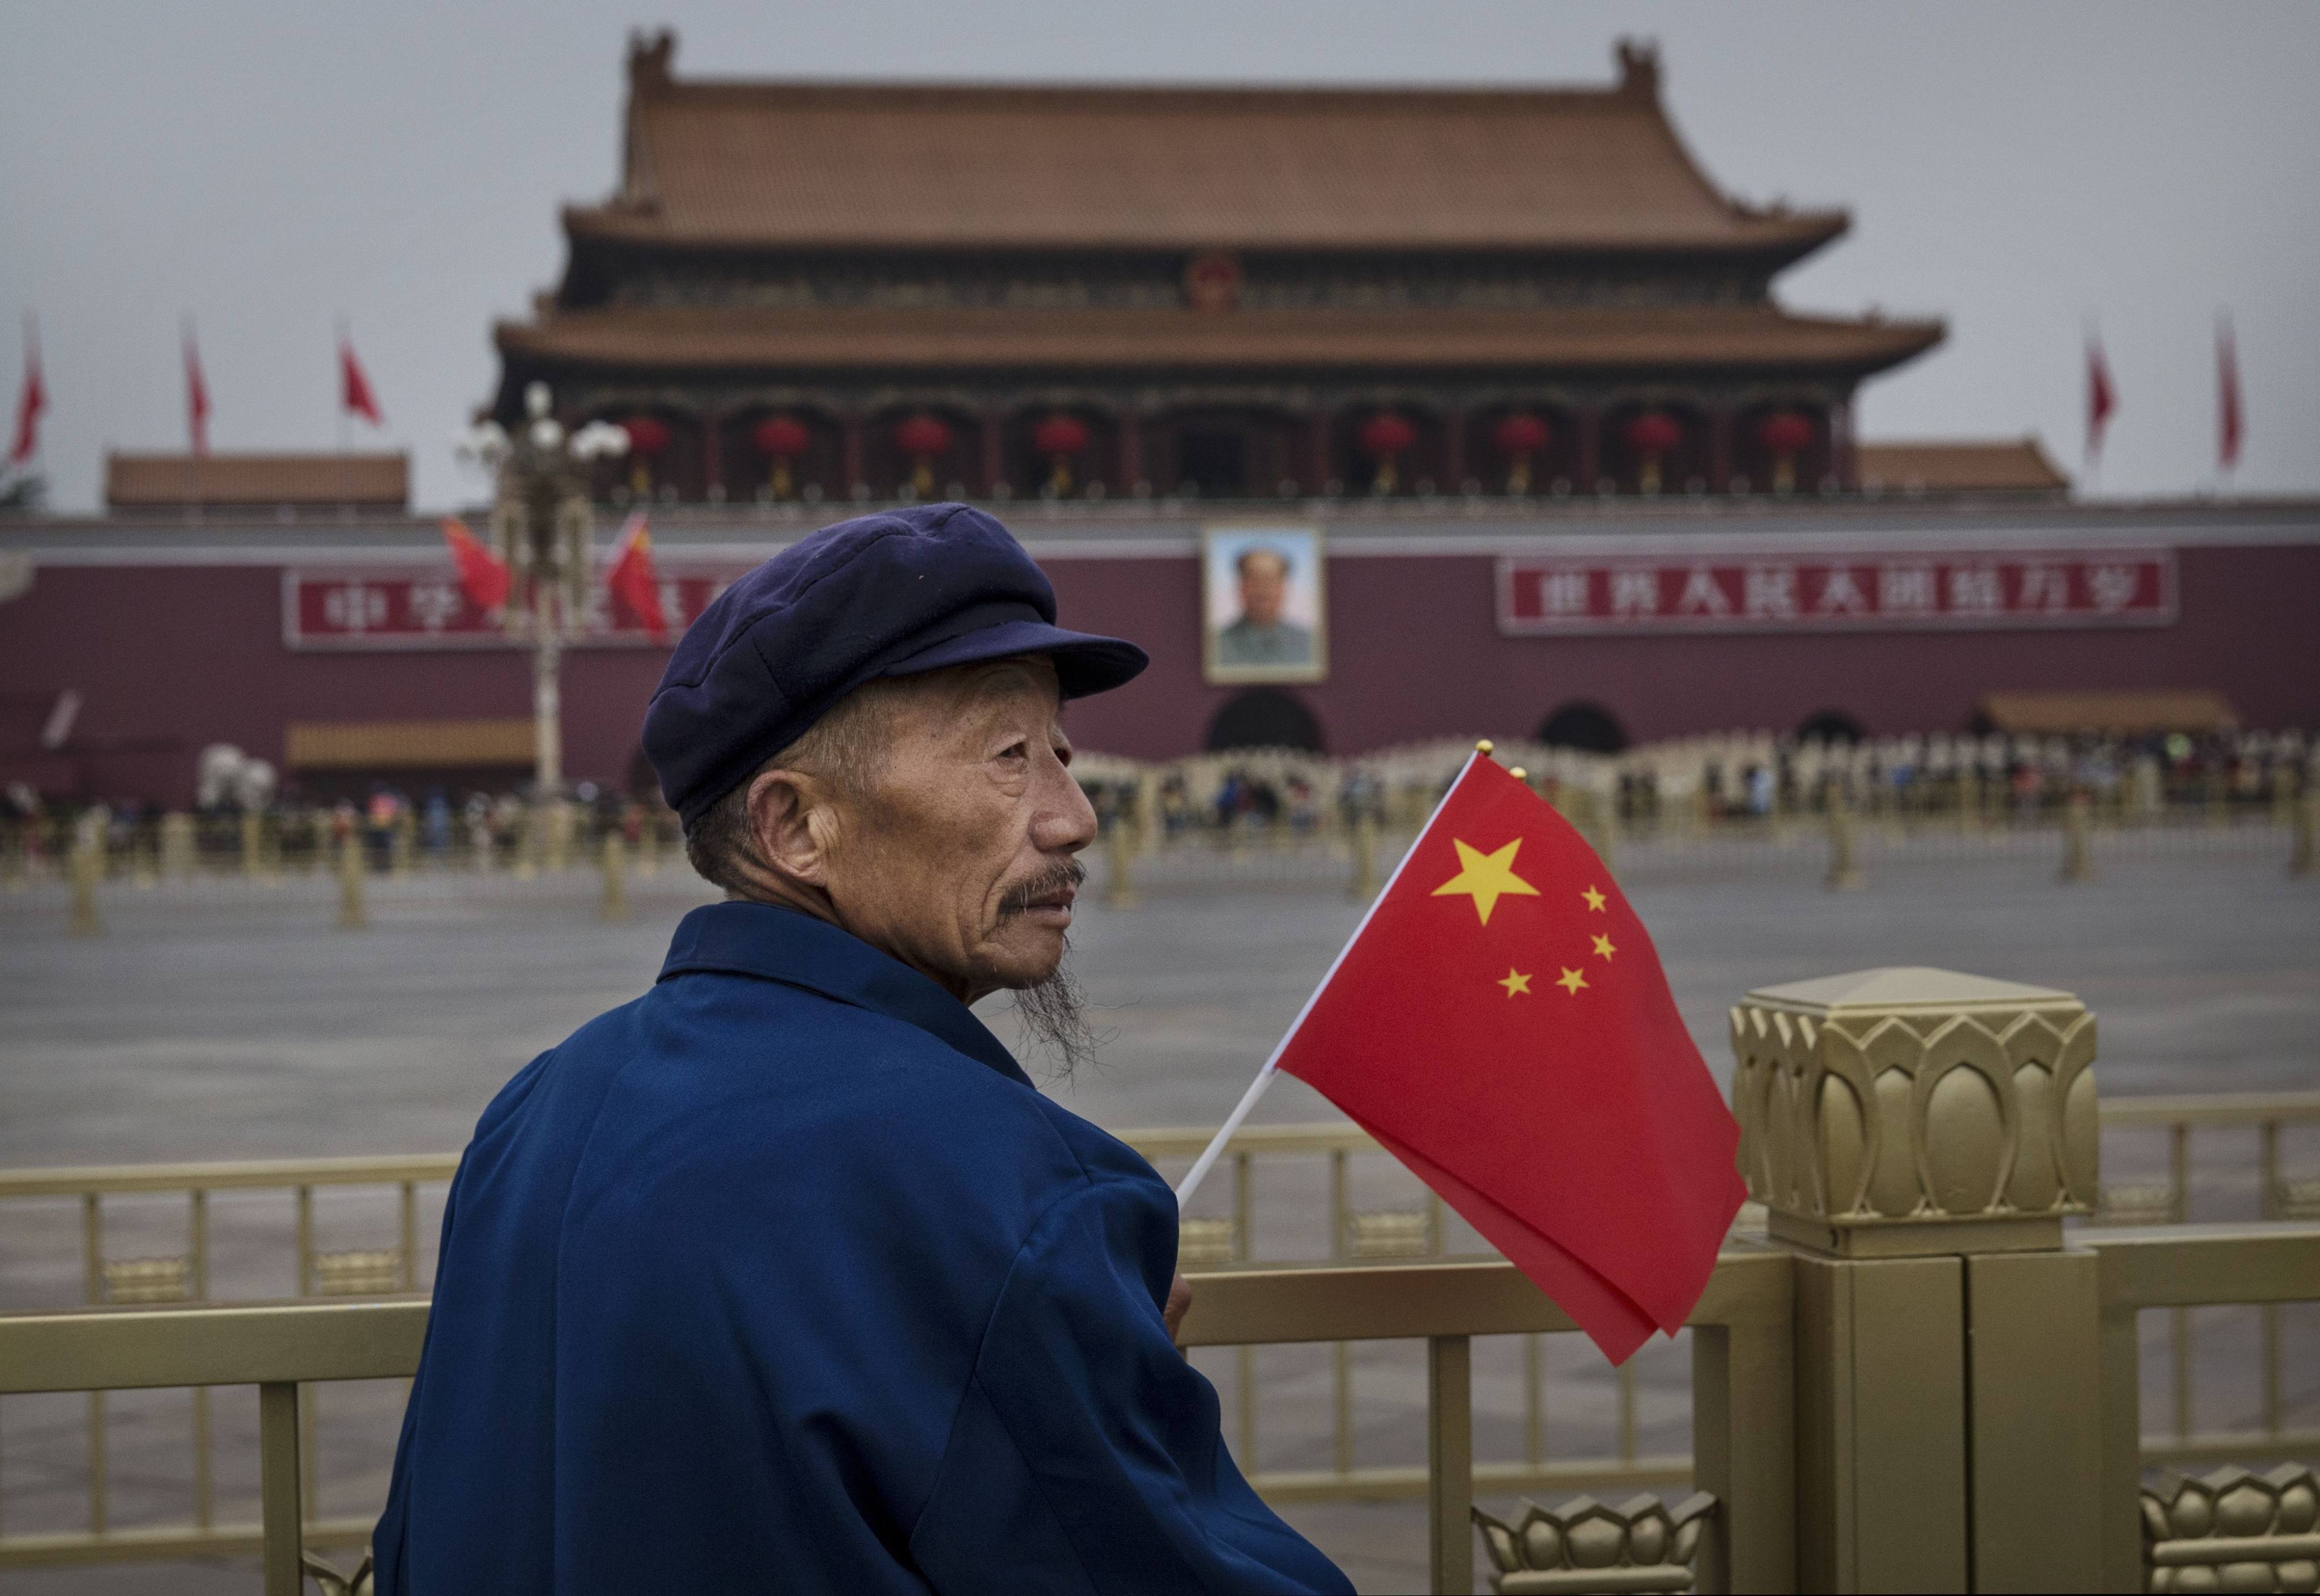 Beijing has unveiled a private pension scheme that will let employees save funds in pension accounts and invest in financial products. Photo: Getty Images